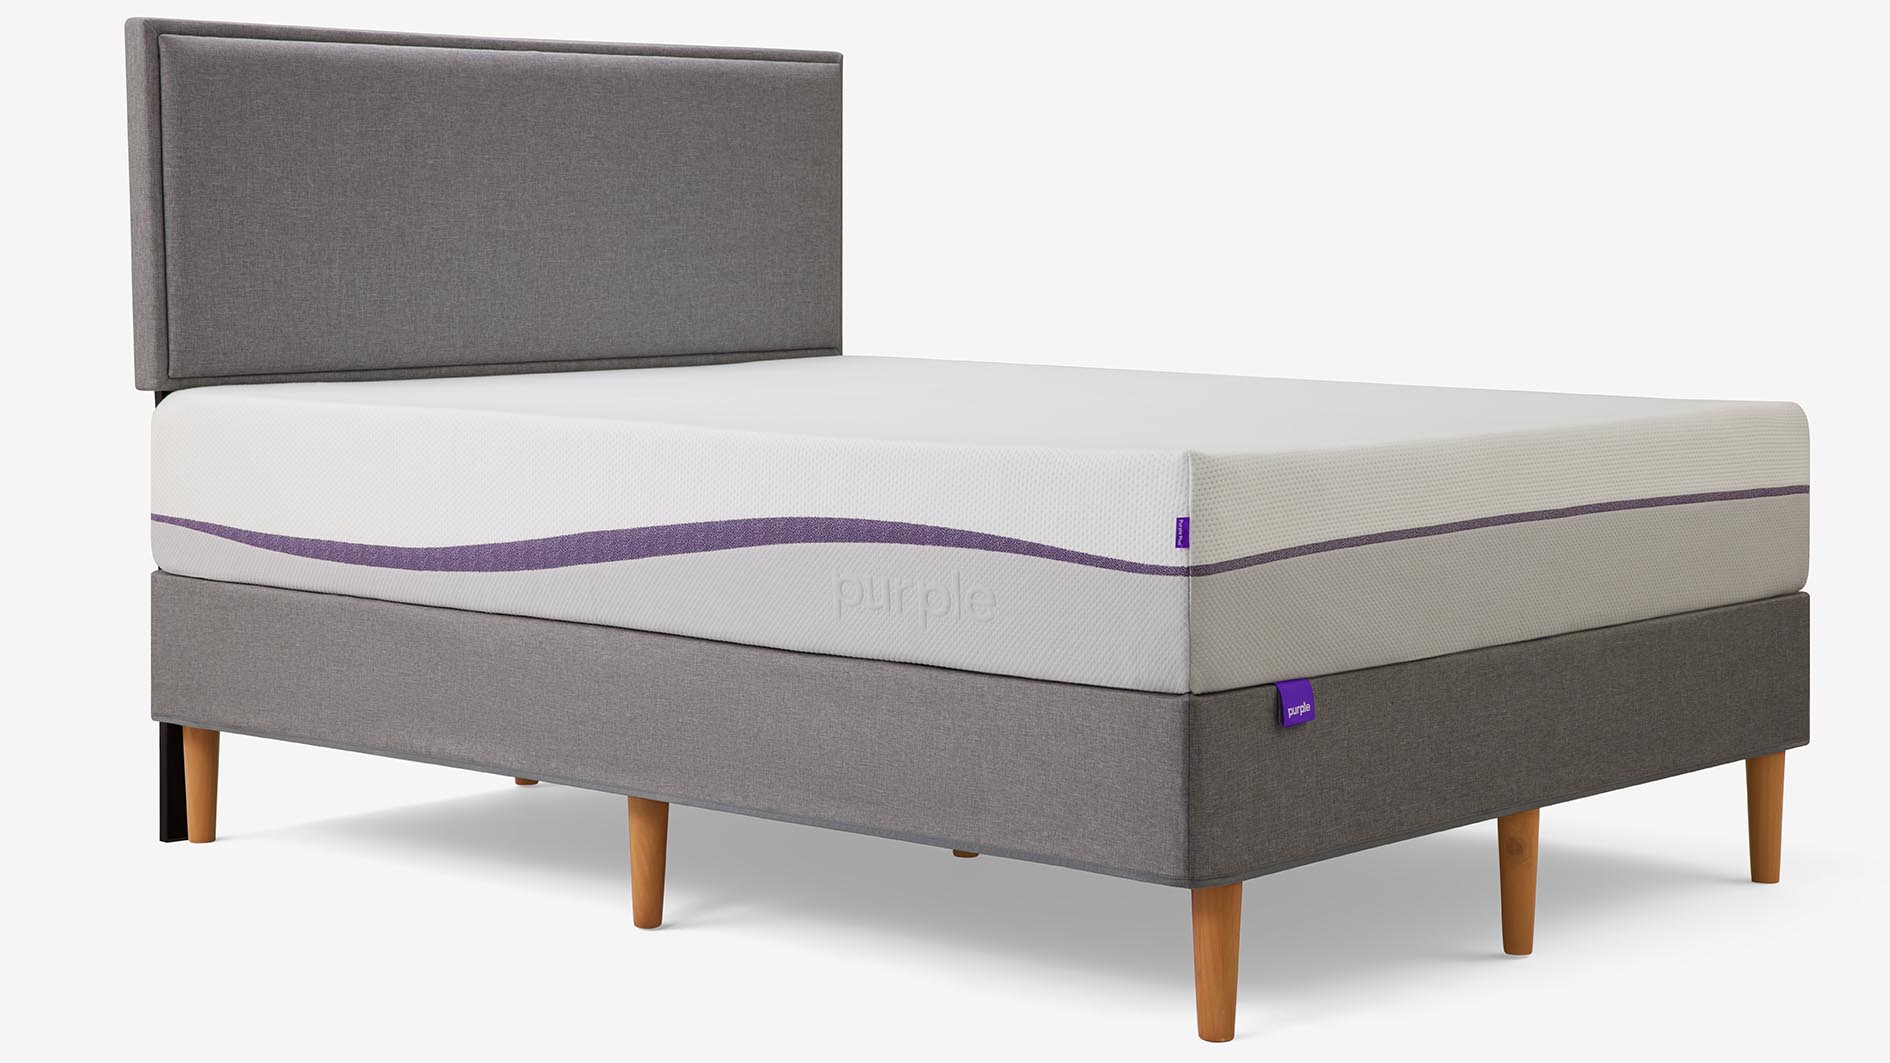 The Purple Plus Mattress shown from the side while placed on a light gray bed frame